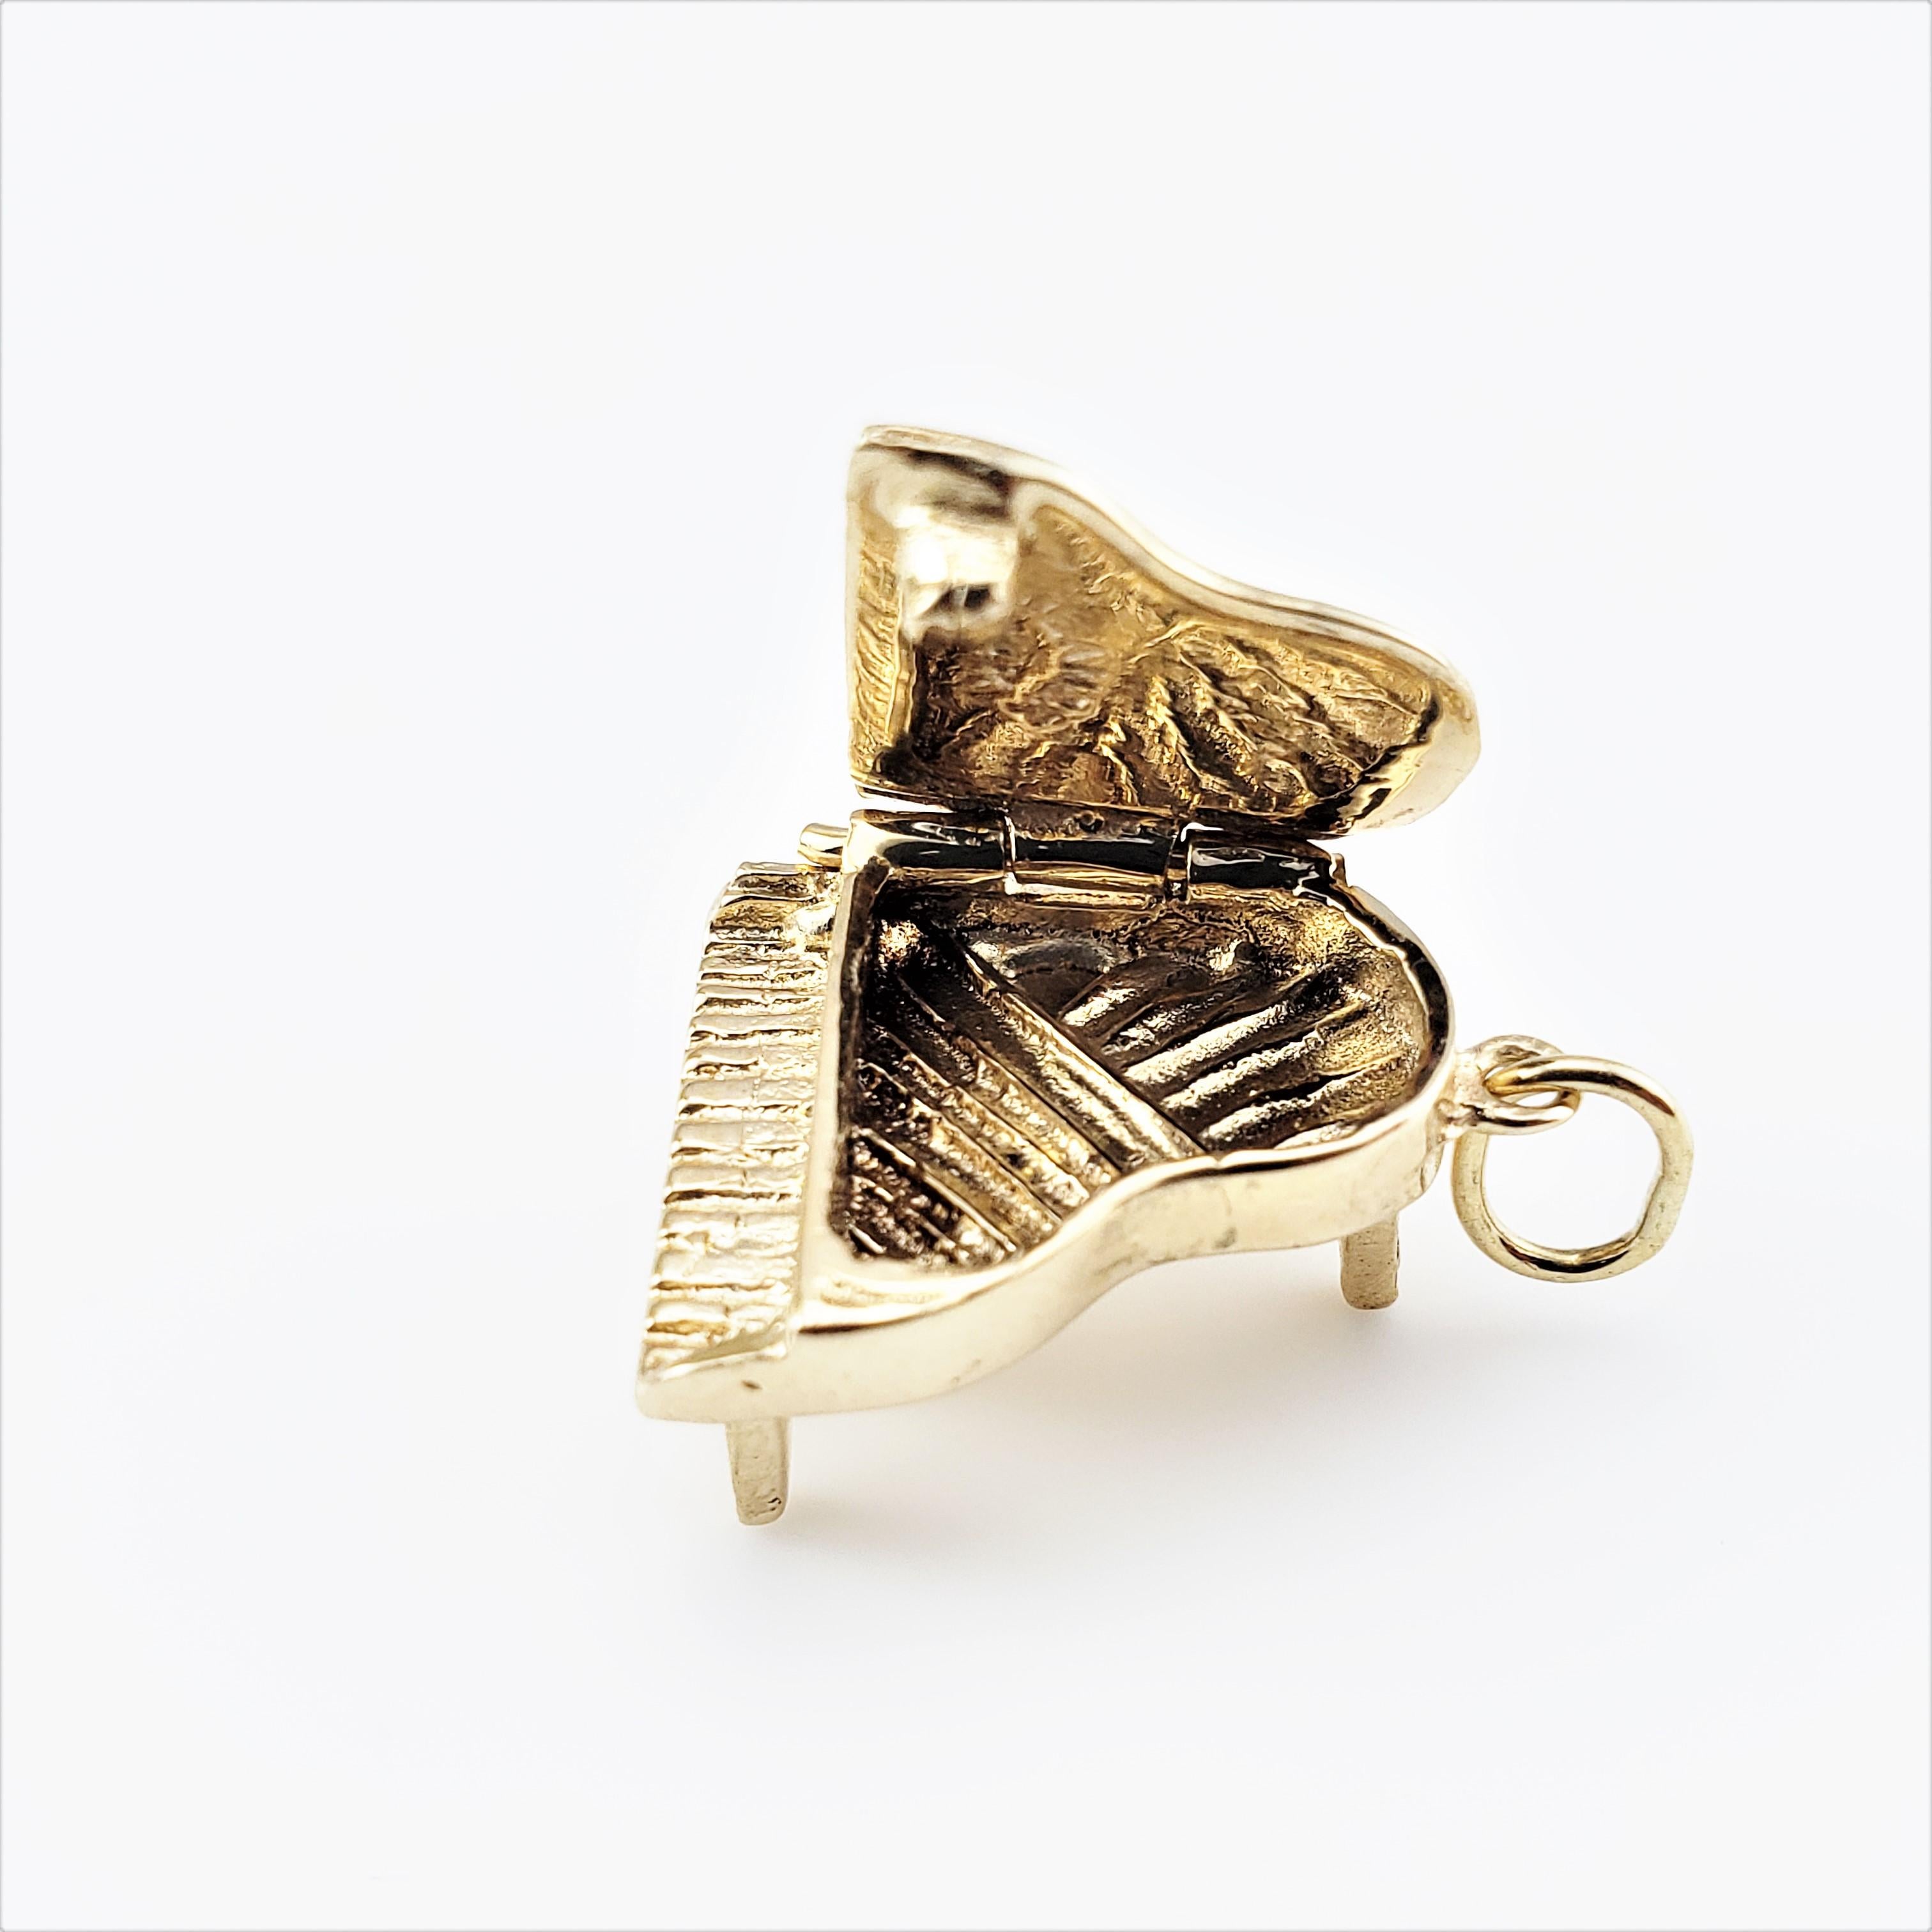 14 Karat Yellow Gold Grand Piano Charm-

Perfect gift for the music lover!

This lovely 3D charm features a miniature piano with hinged lid that opens to reveal its strings.  Meticulously detailed in 14K yellow gold.

*Chain not included

Size:  17